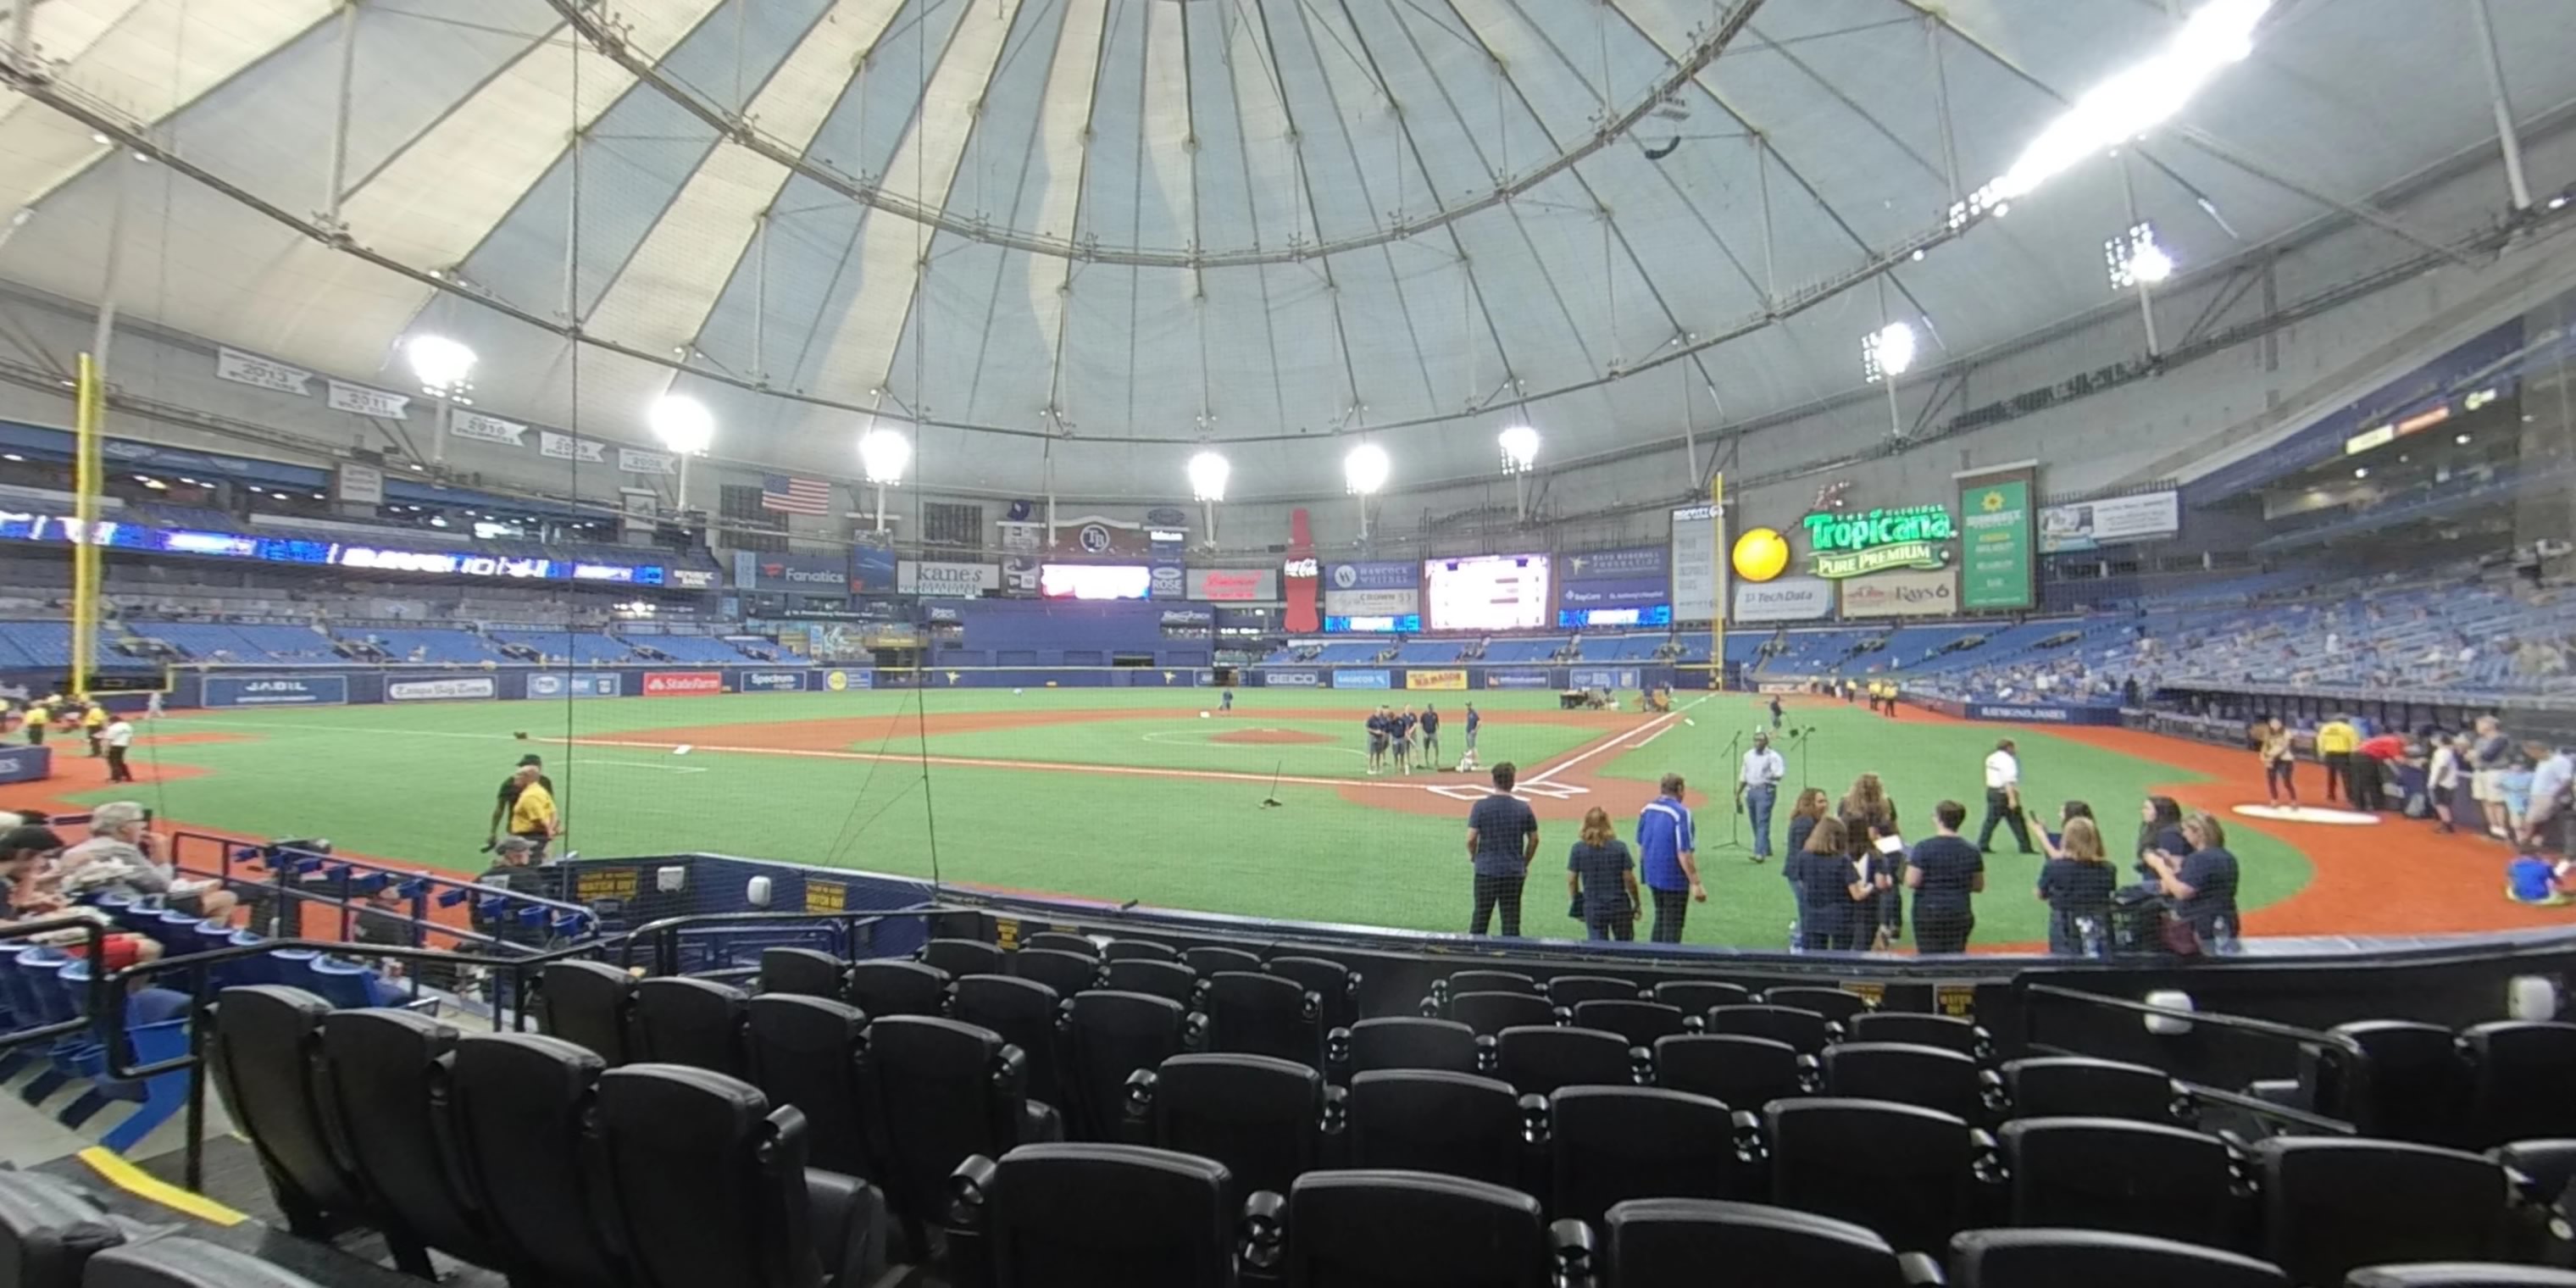 section 107 panoramic seat view  for baseball - tropicana field